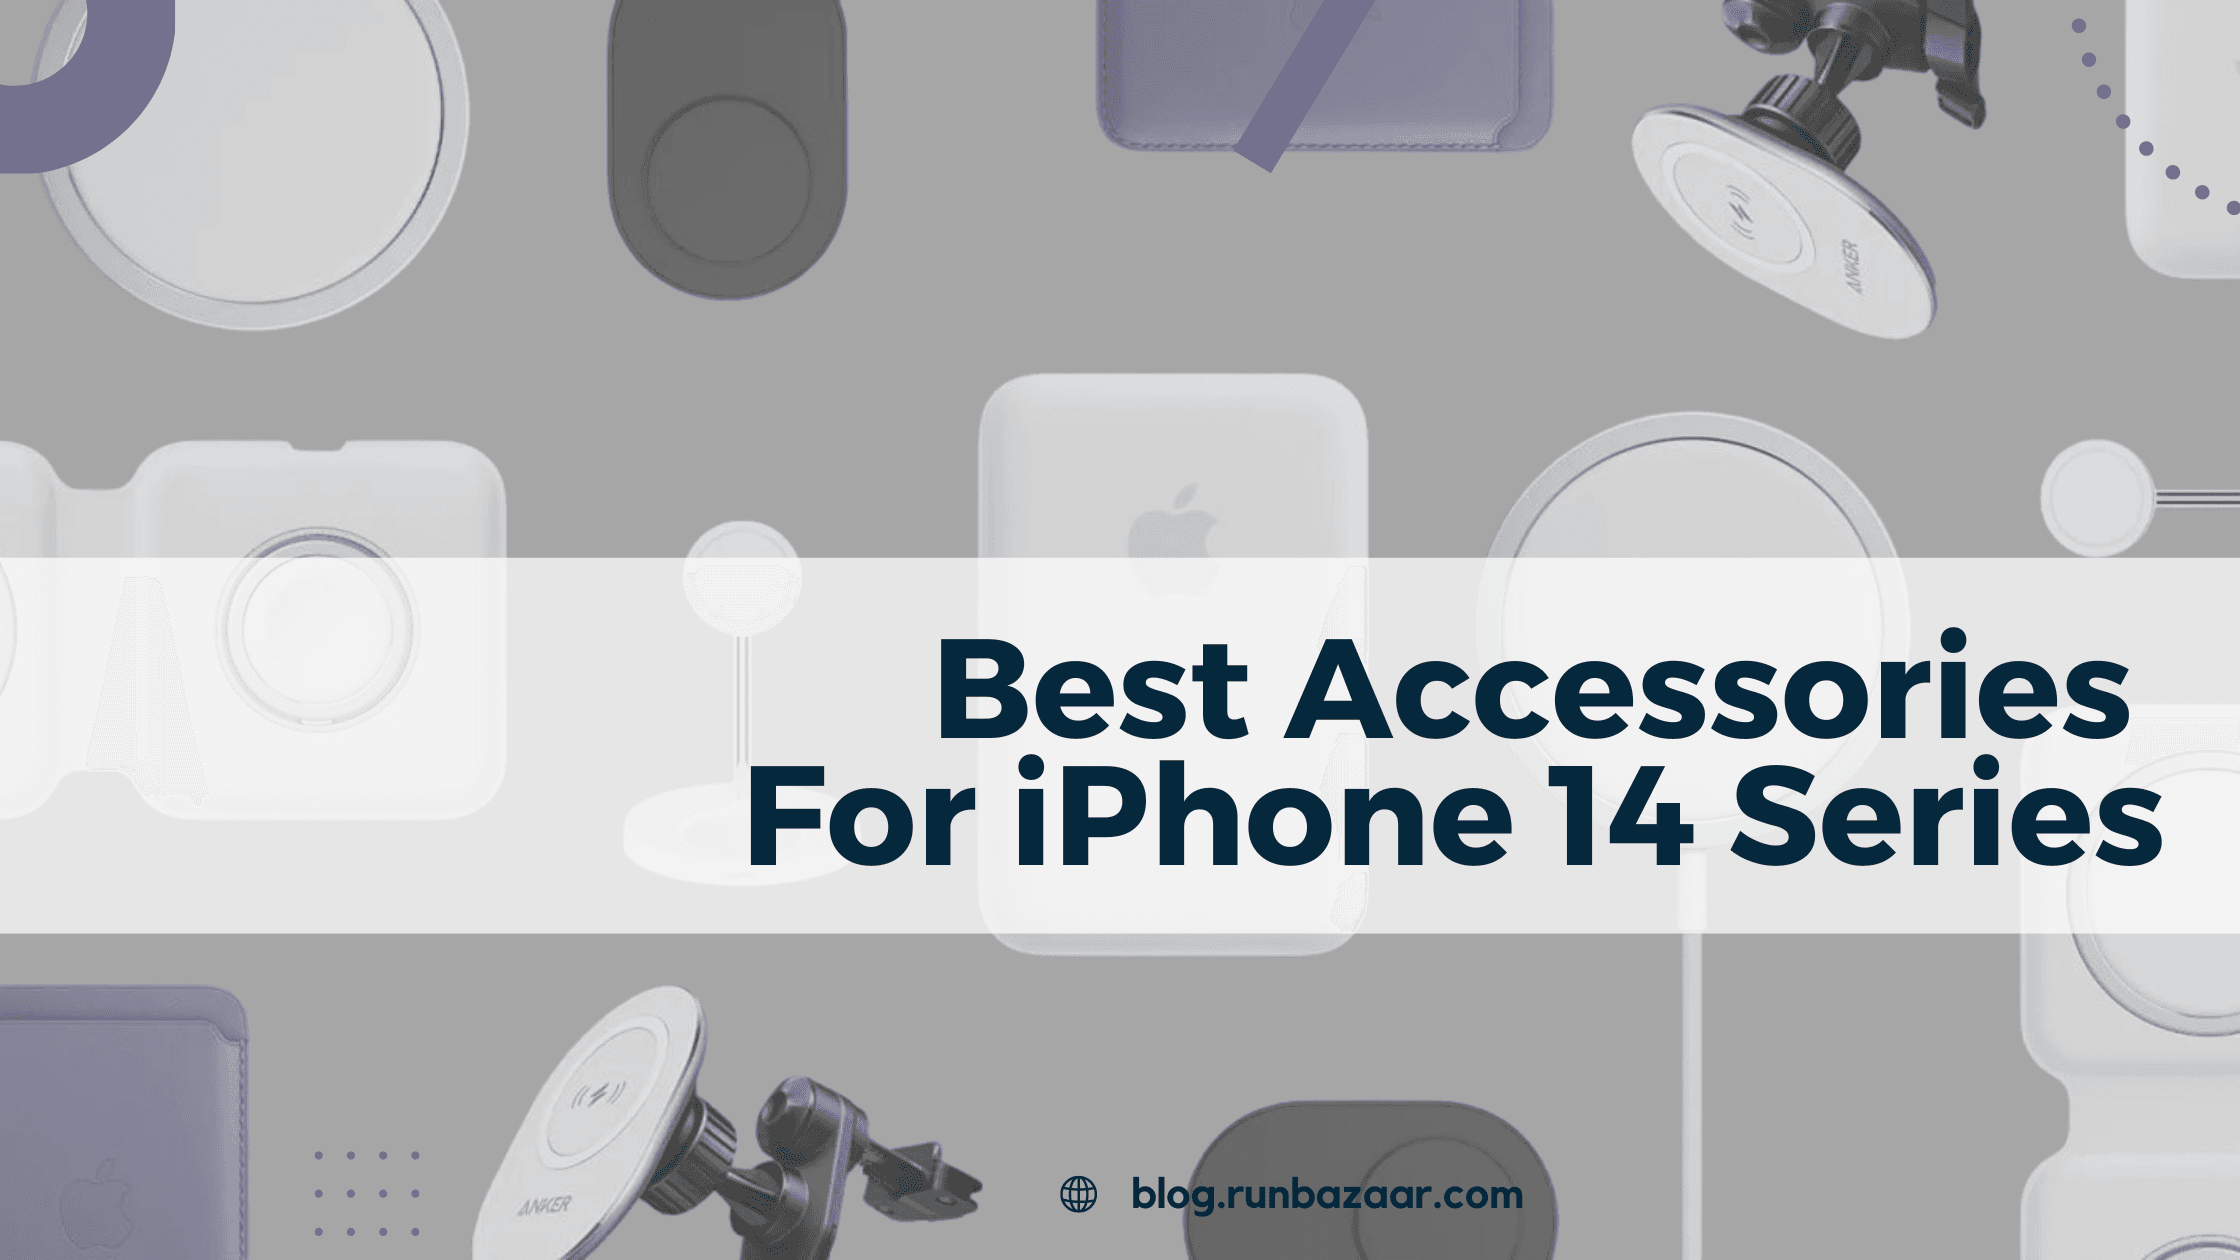 Still Looking for the Stock of Best iPhone 14 accessories? Here is the Answer!